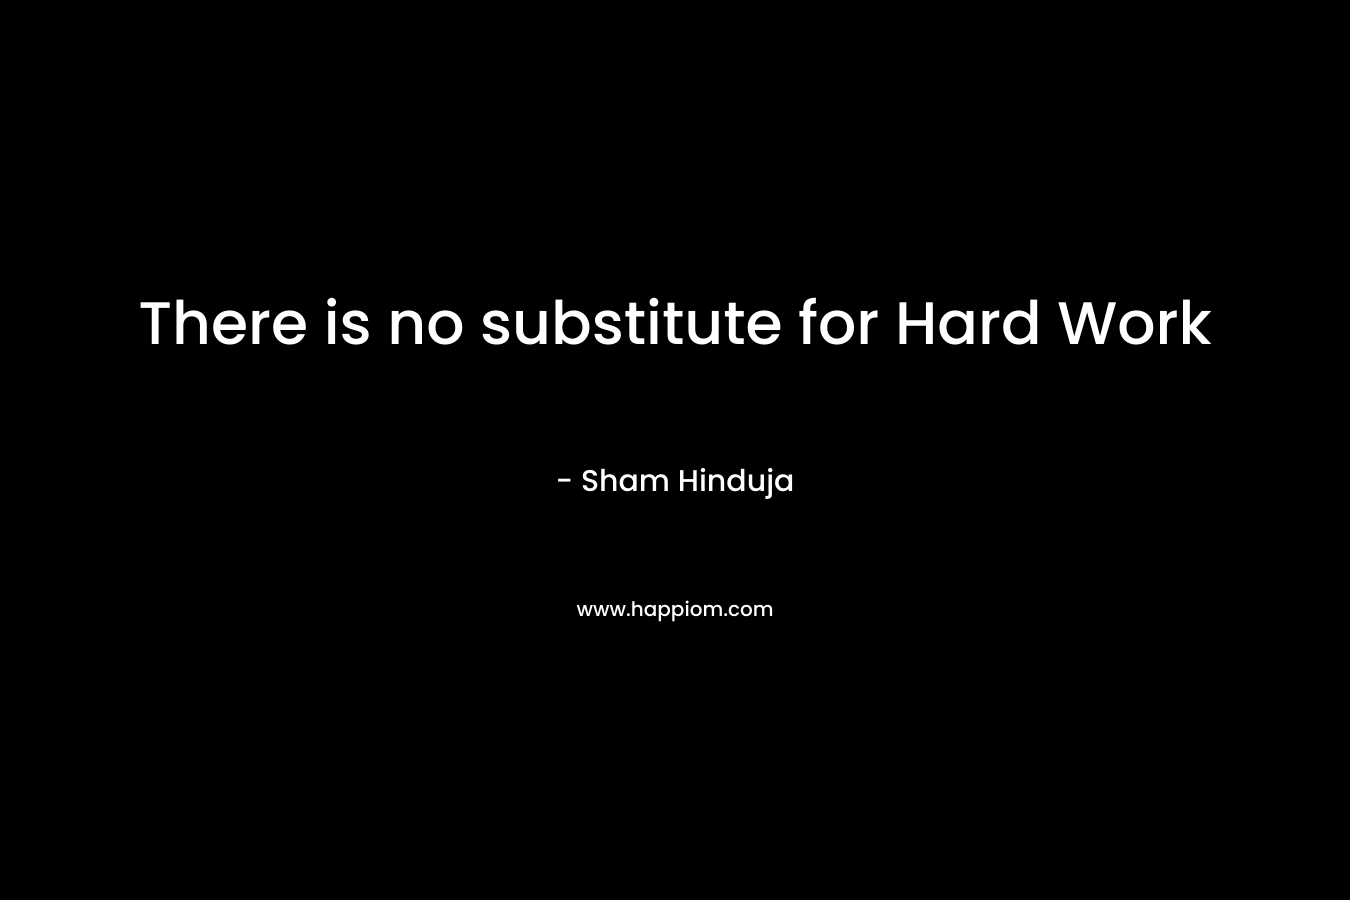 There is no substitute for Hard Work